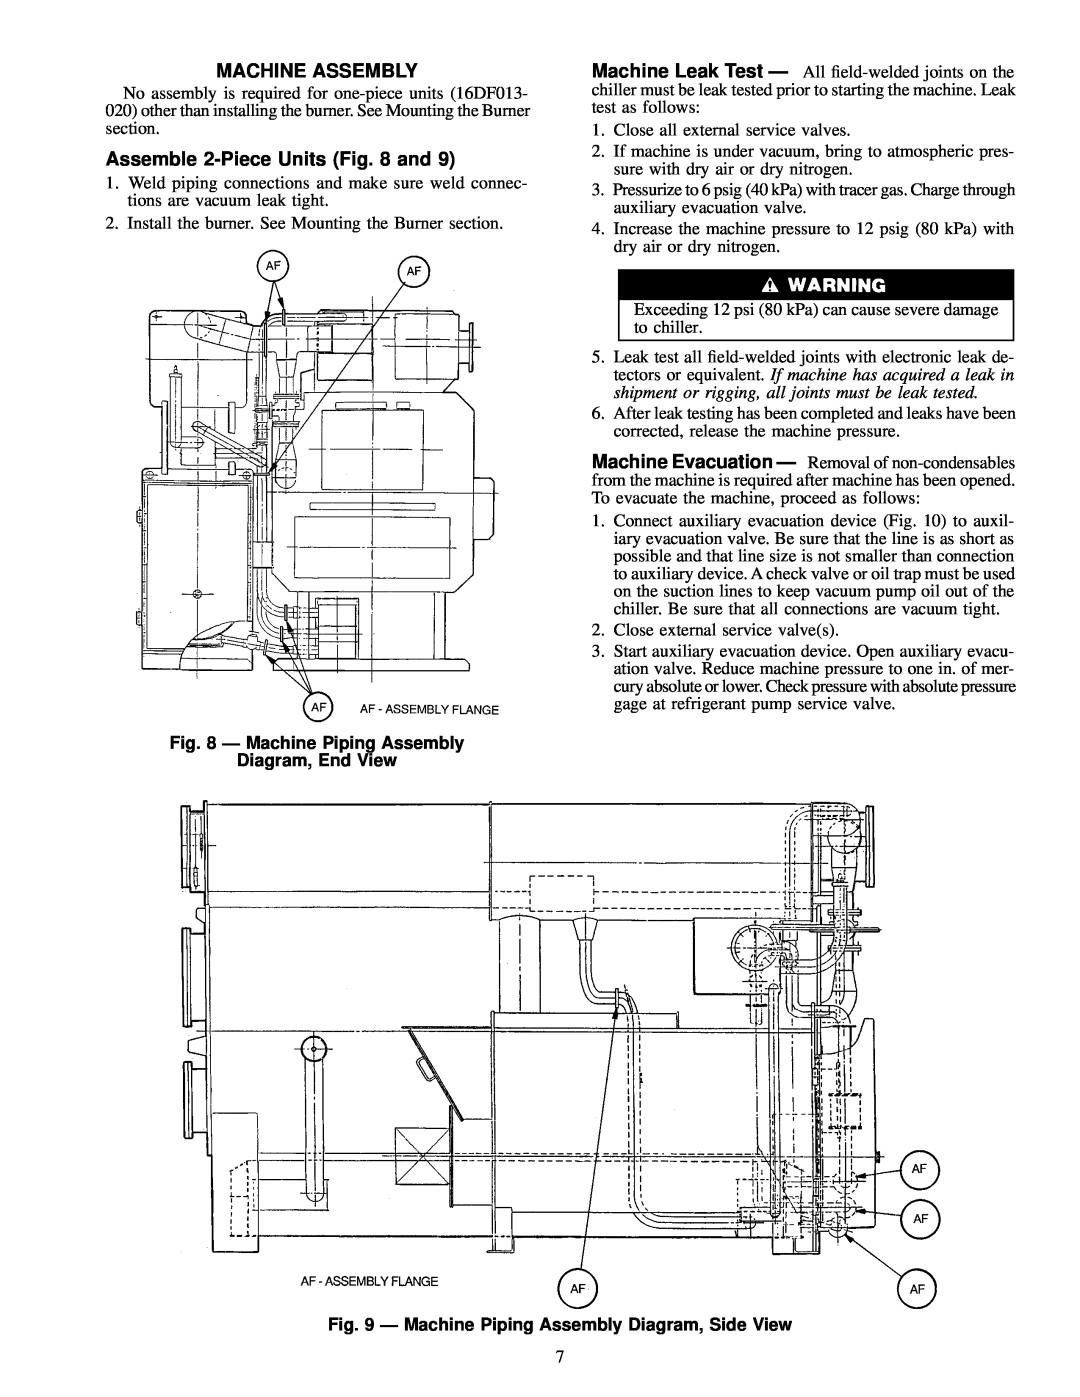 Carrier 16DF013-050 Machine Assembly, Assemble 2-PieceUnits and, Ð Machine Piping Assembly, Diagram, End View 